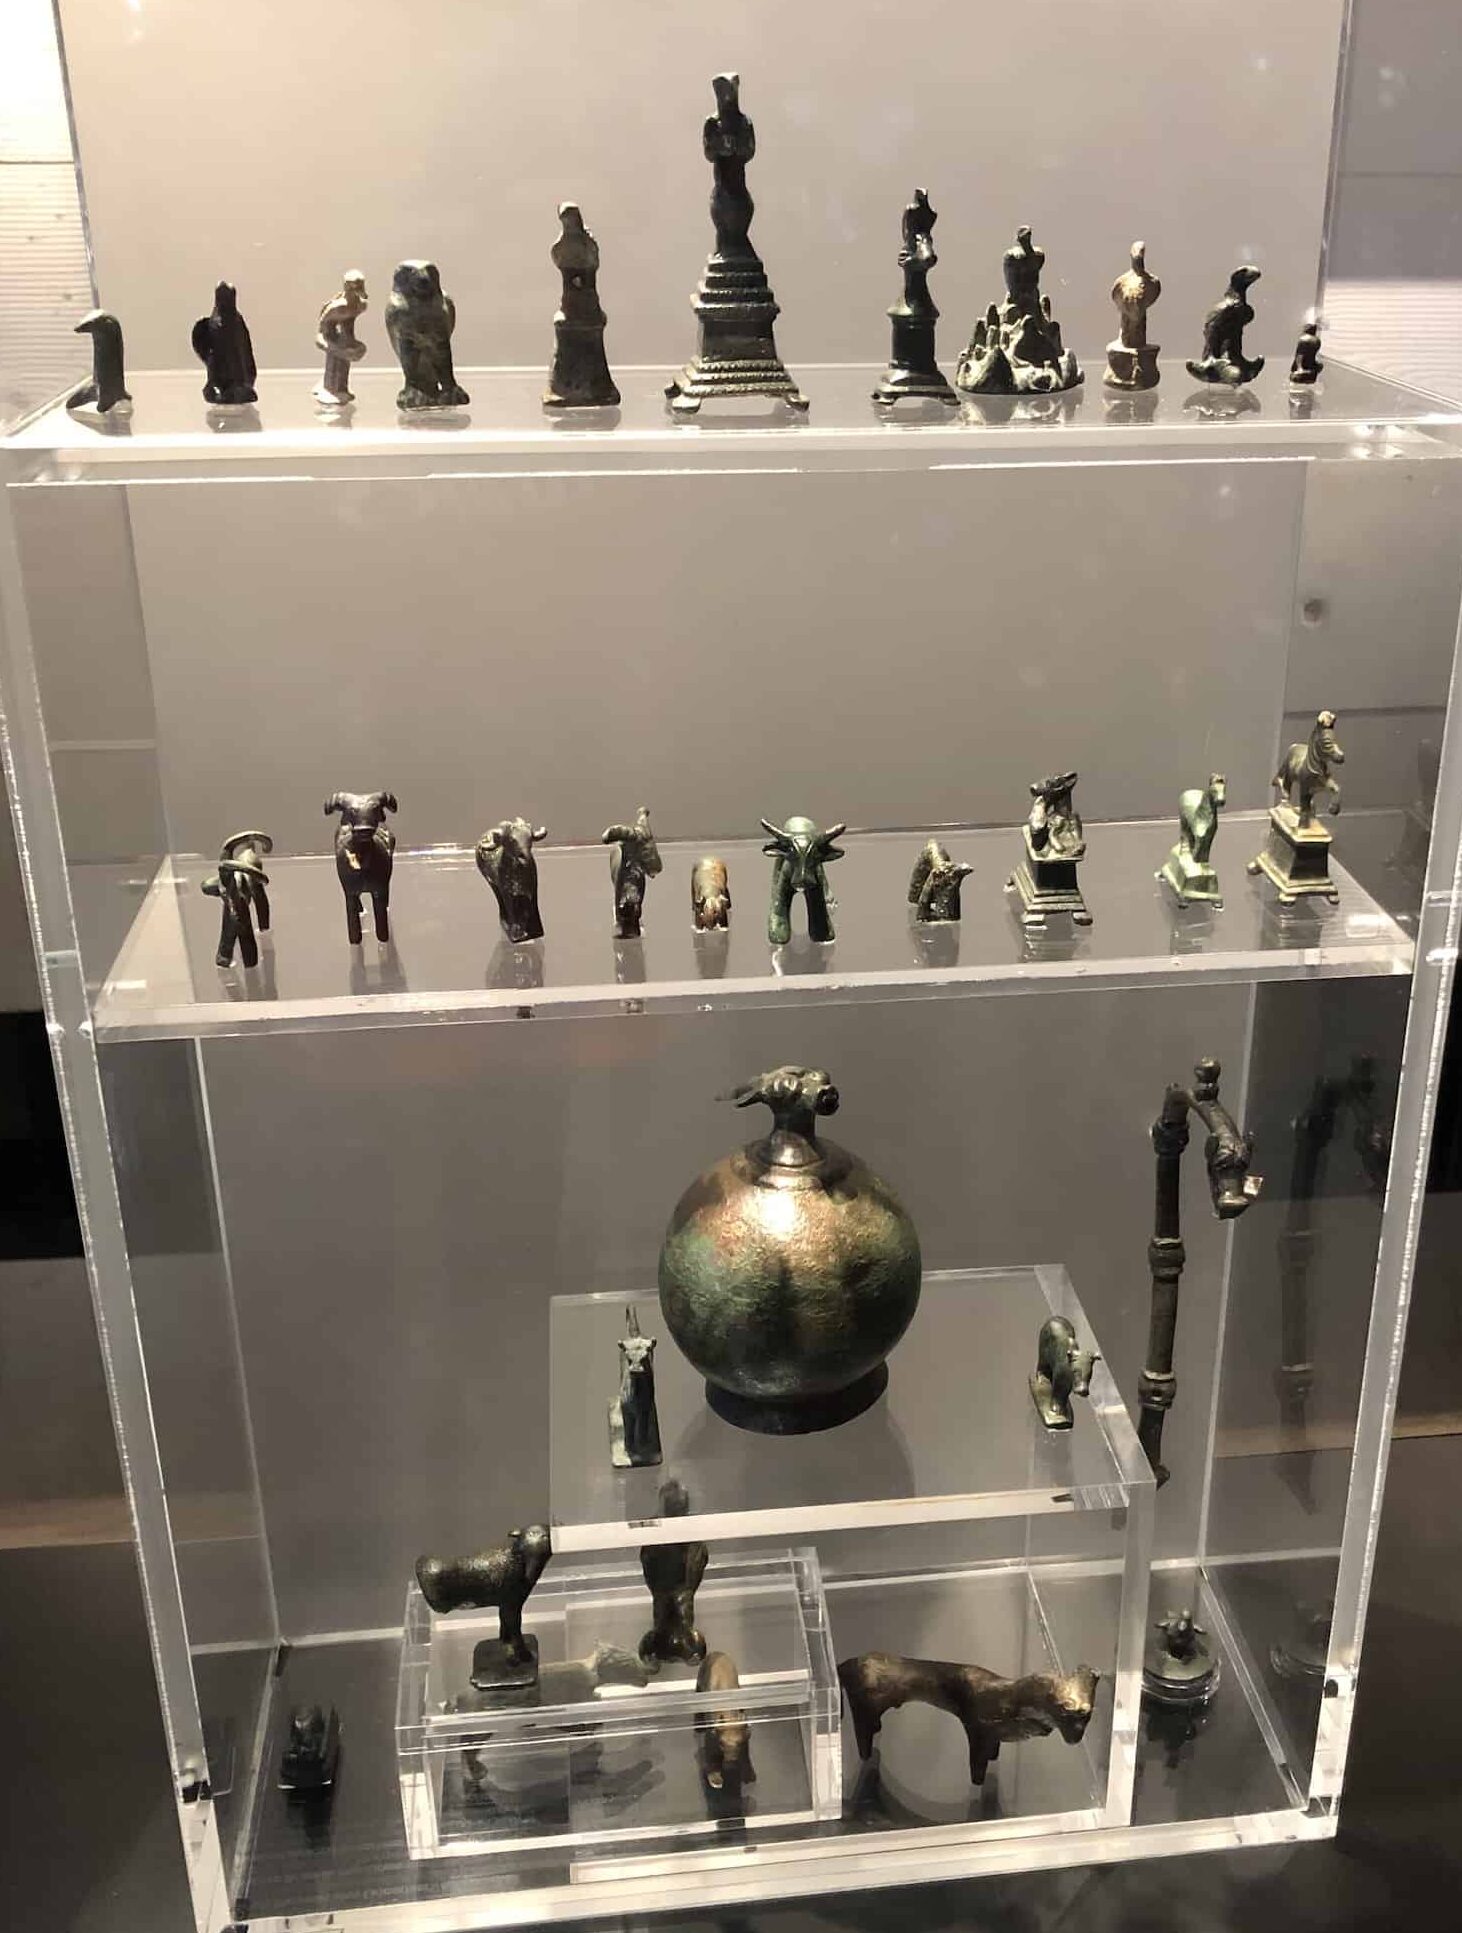 Bronze figurines and weights, Hellenistic and Roman periods, 3rd century BC to 3rd century AD